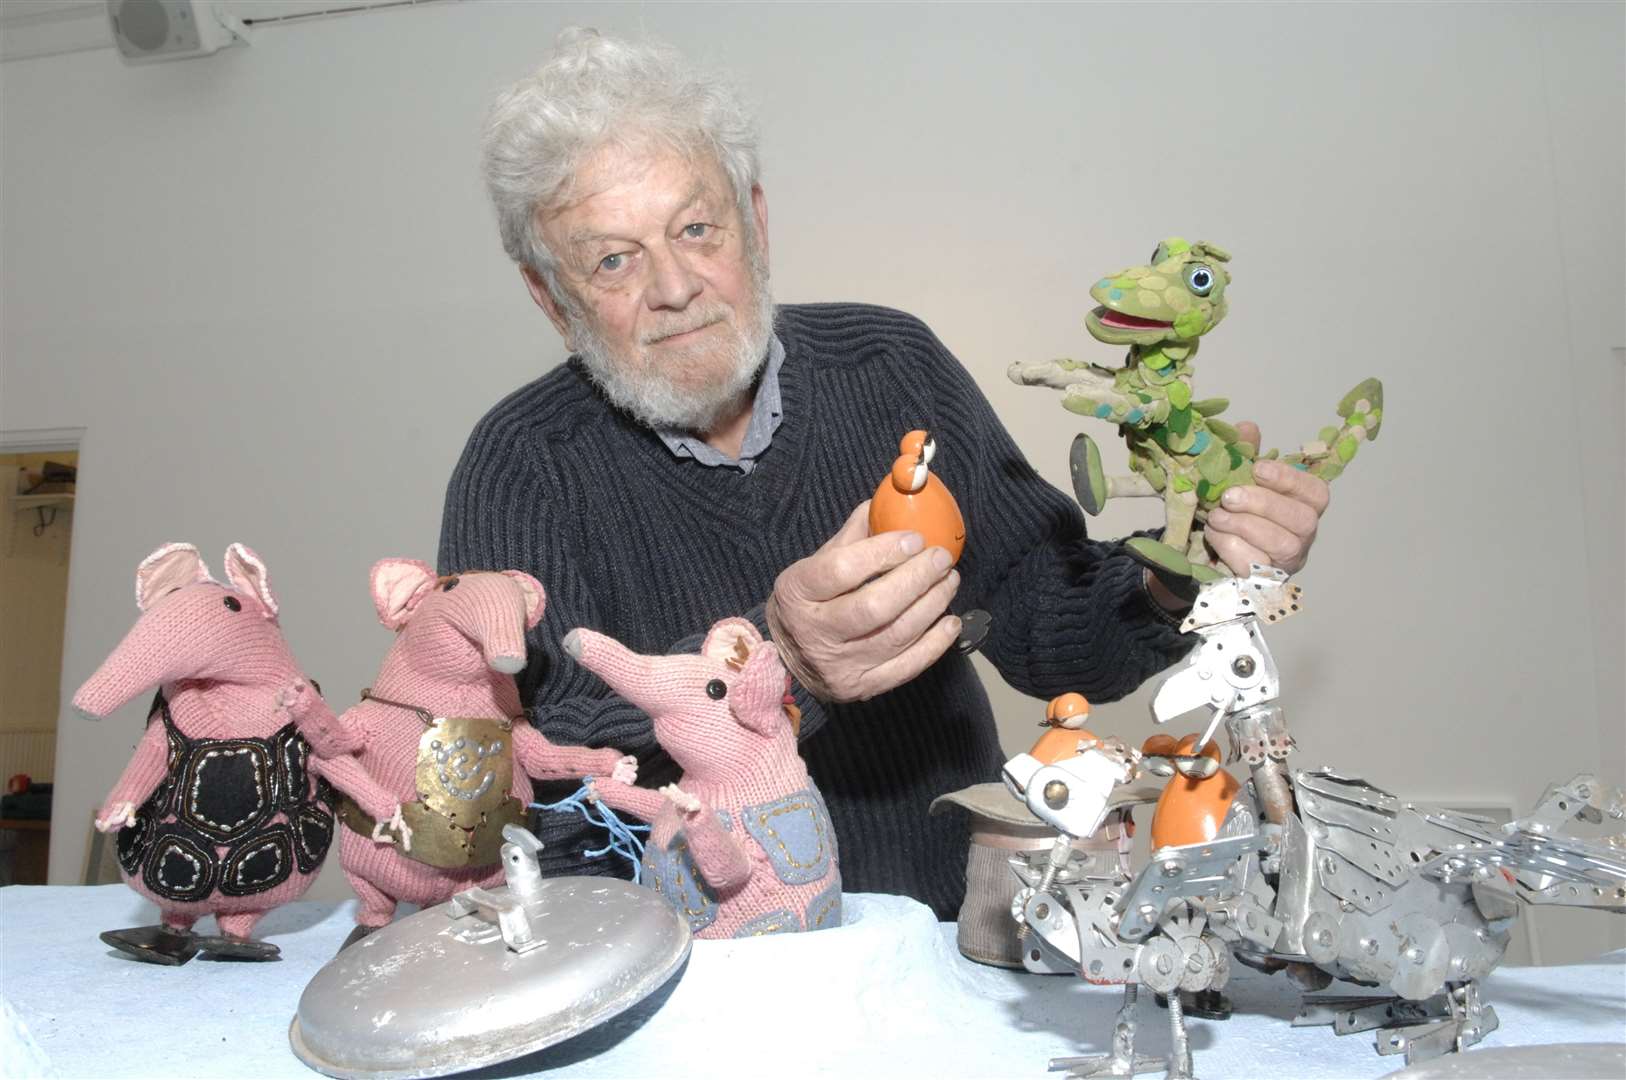 Peter Firmin and the Clangers